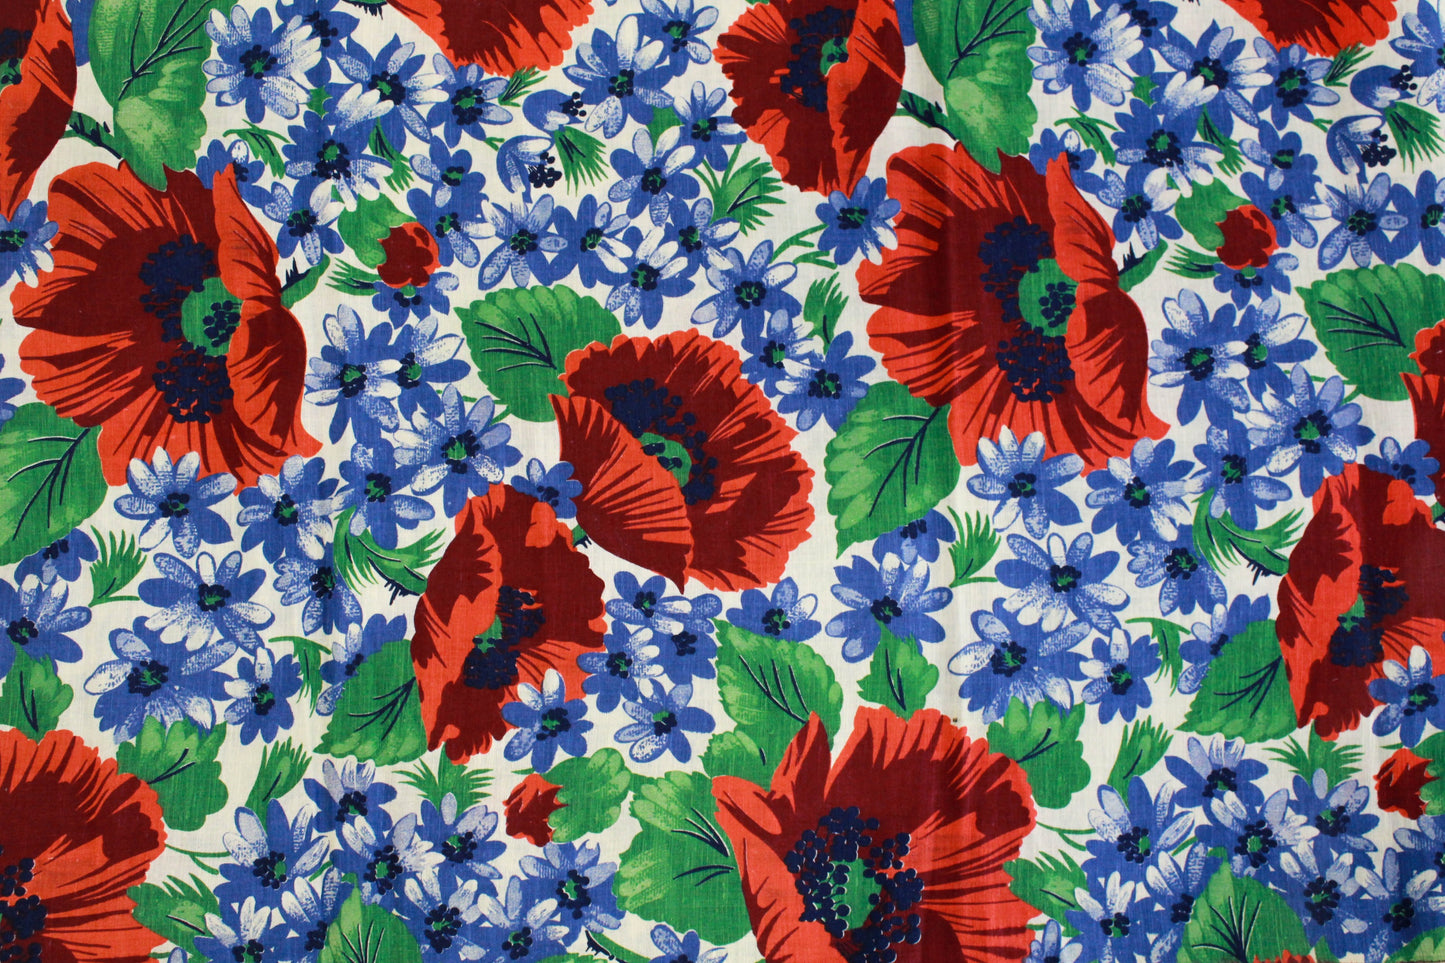 Floral Painterly Cotton Shirting on Blue - Designer, from Italy